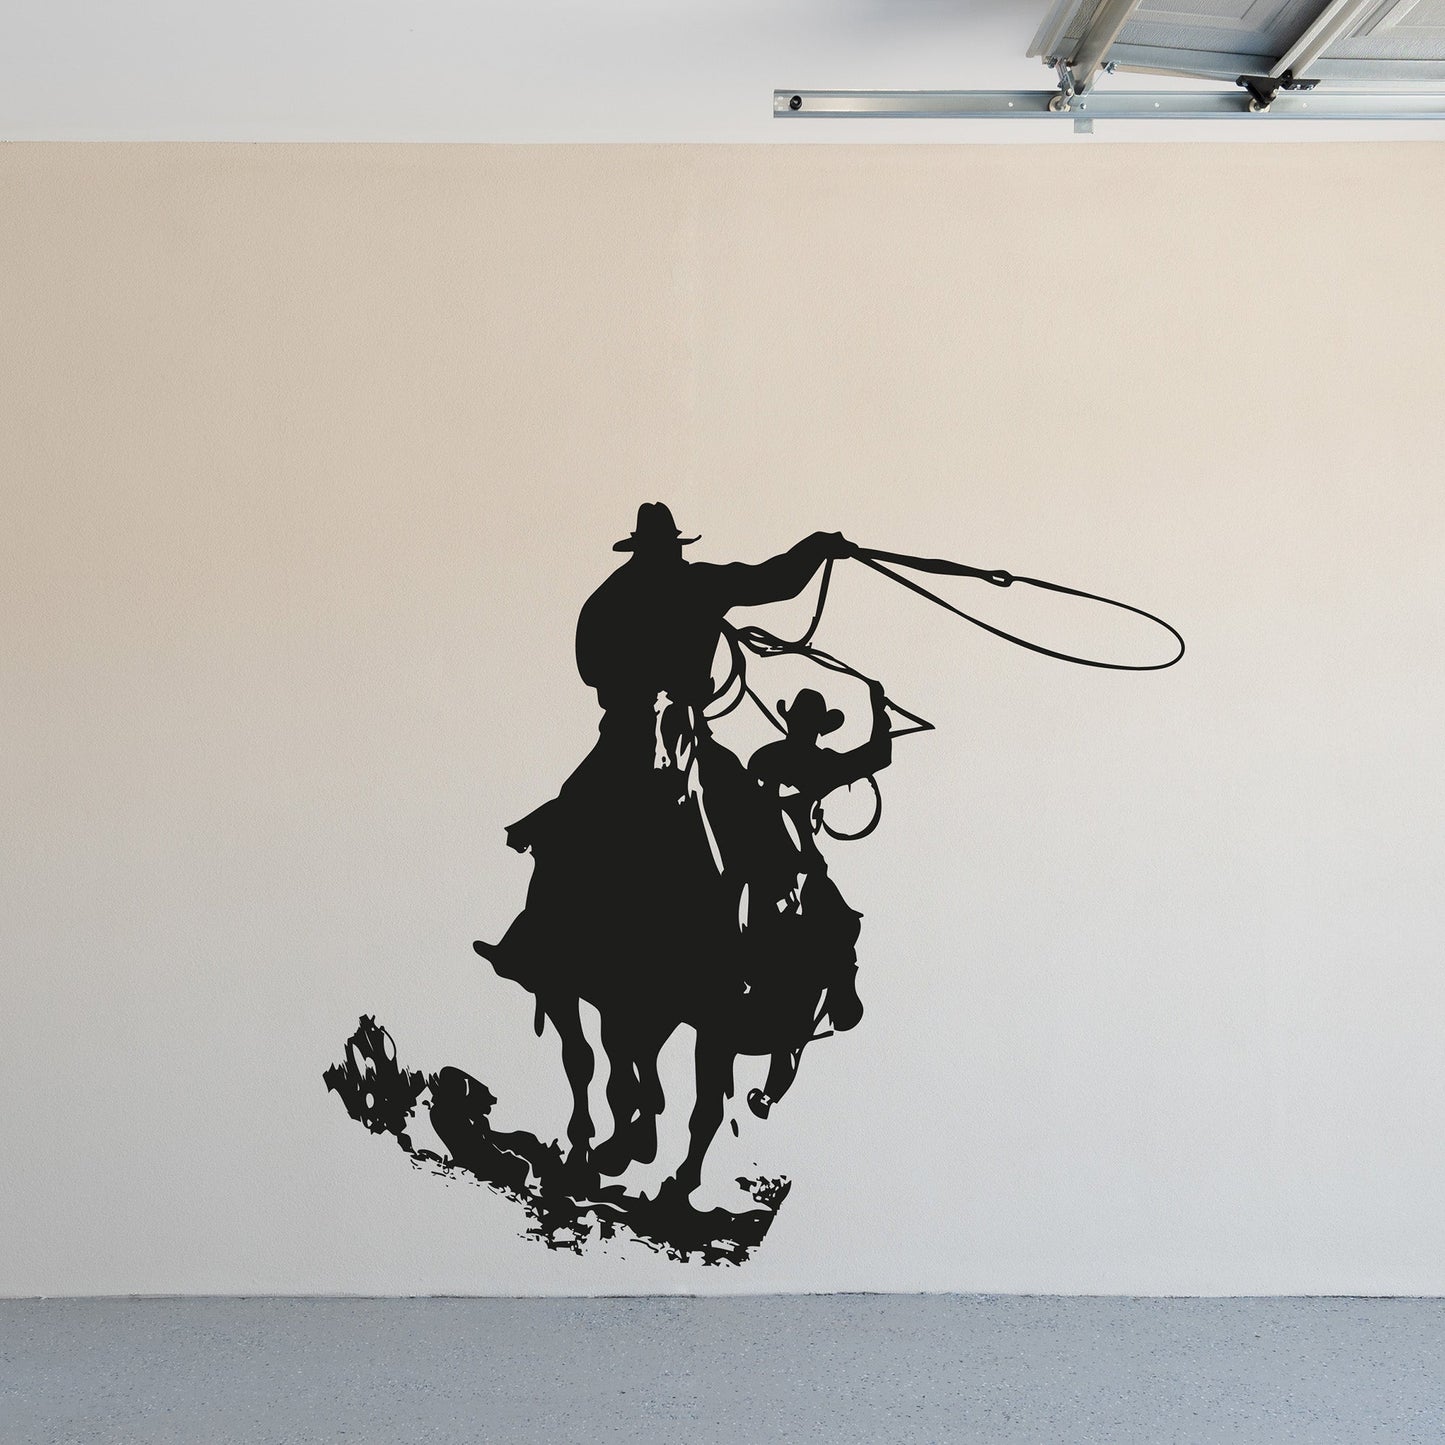 Wild West Cowboys Roping Lasso Wall Decal Sticker. #OS_AA429